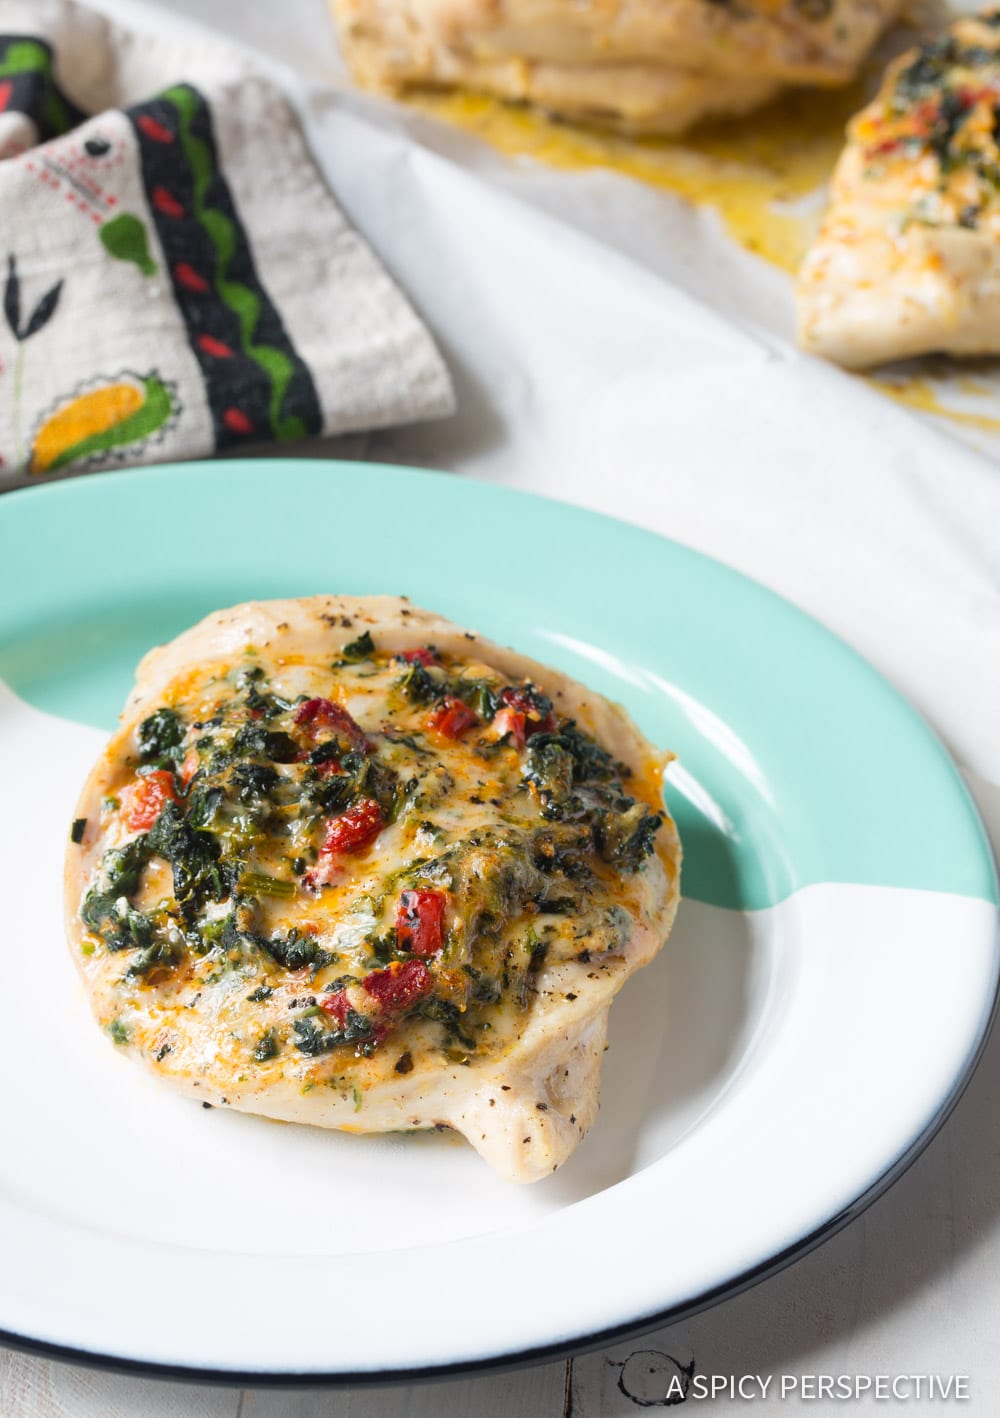 Perfect Cheesy Spinach Stuffed Chicken Breasts Recipe #ASpicyPerspective